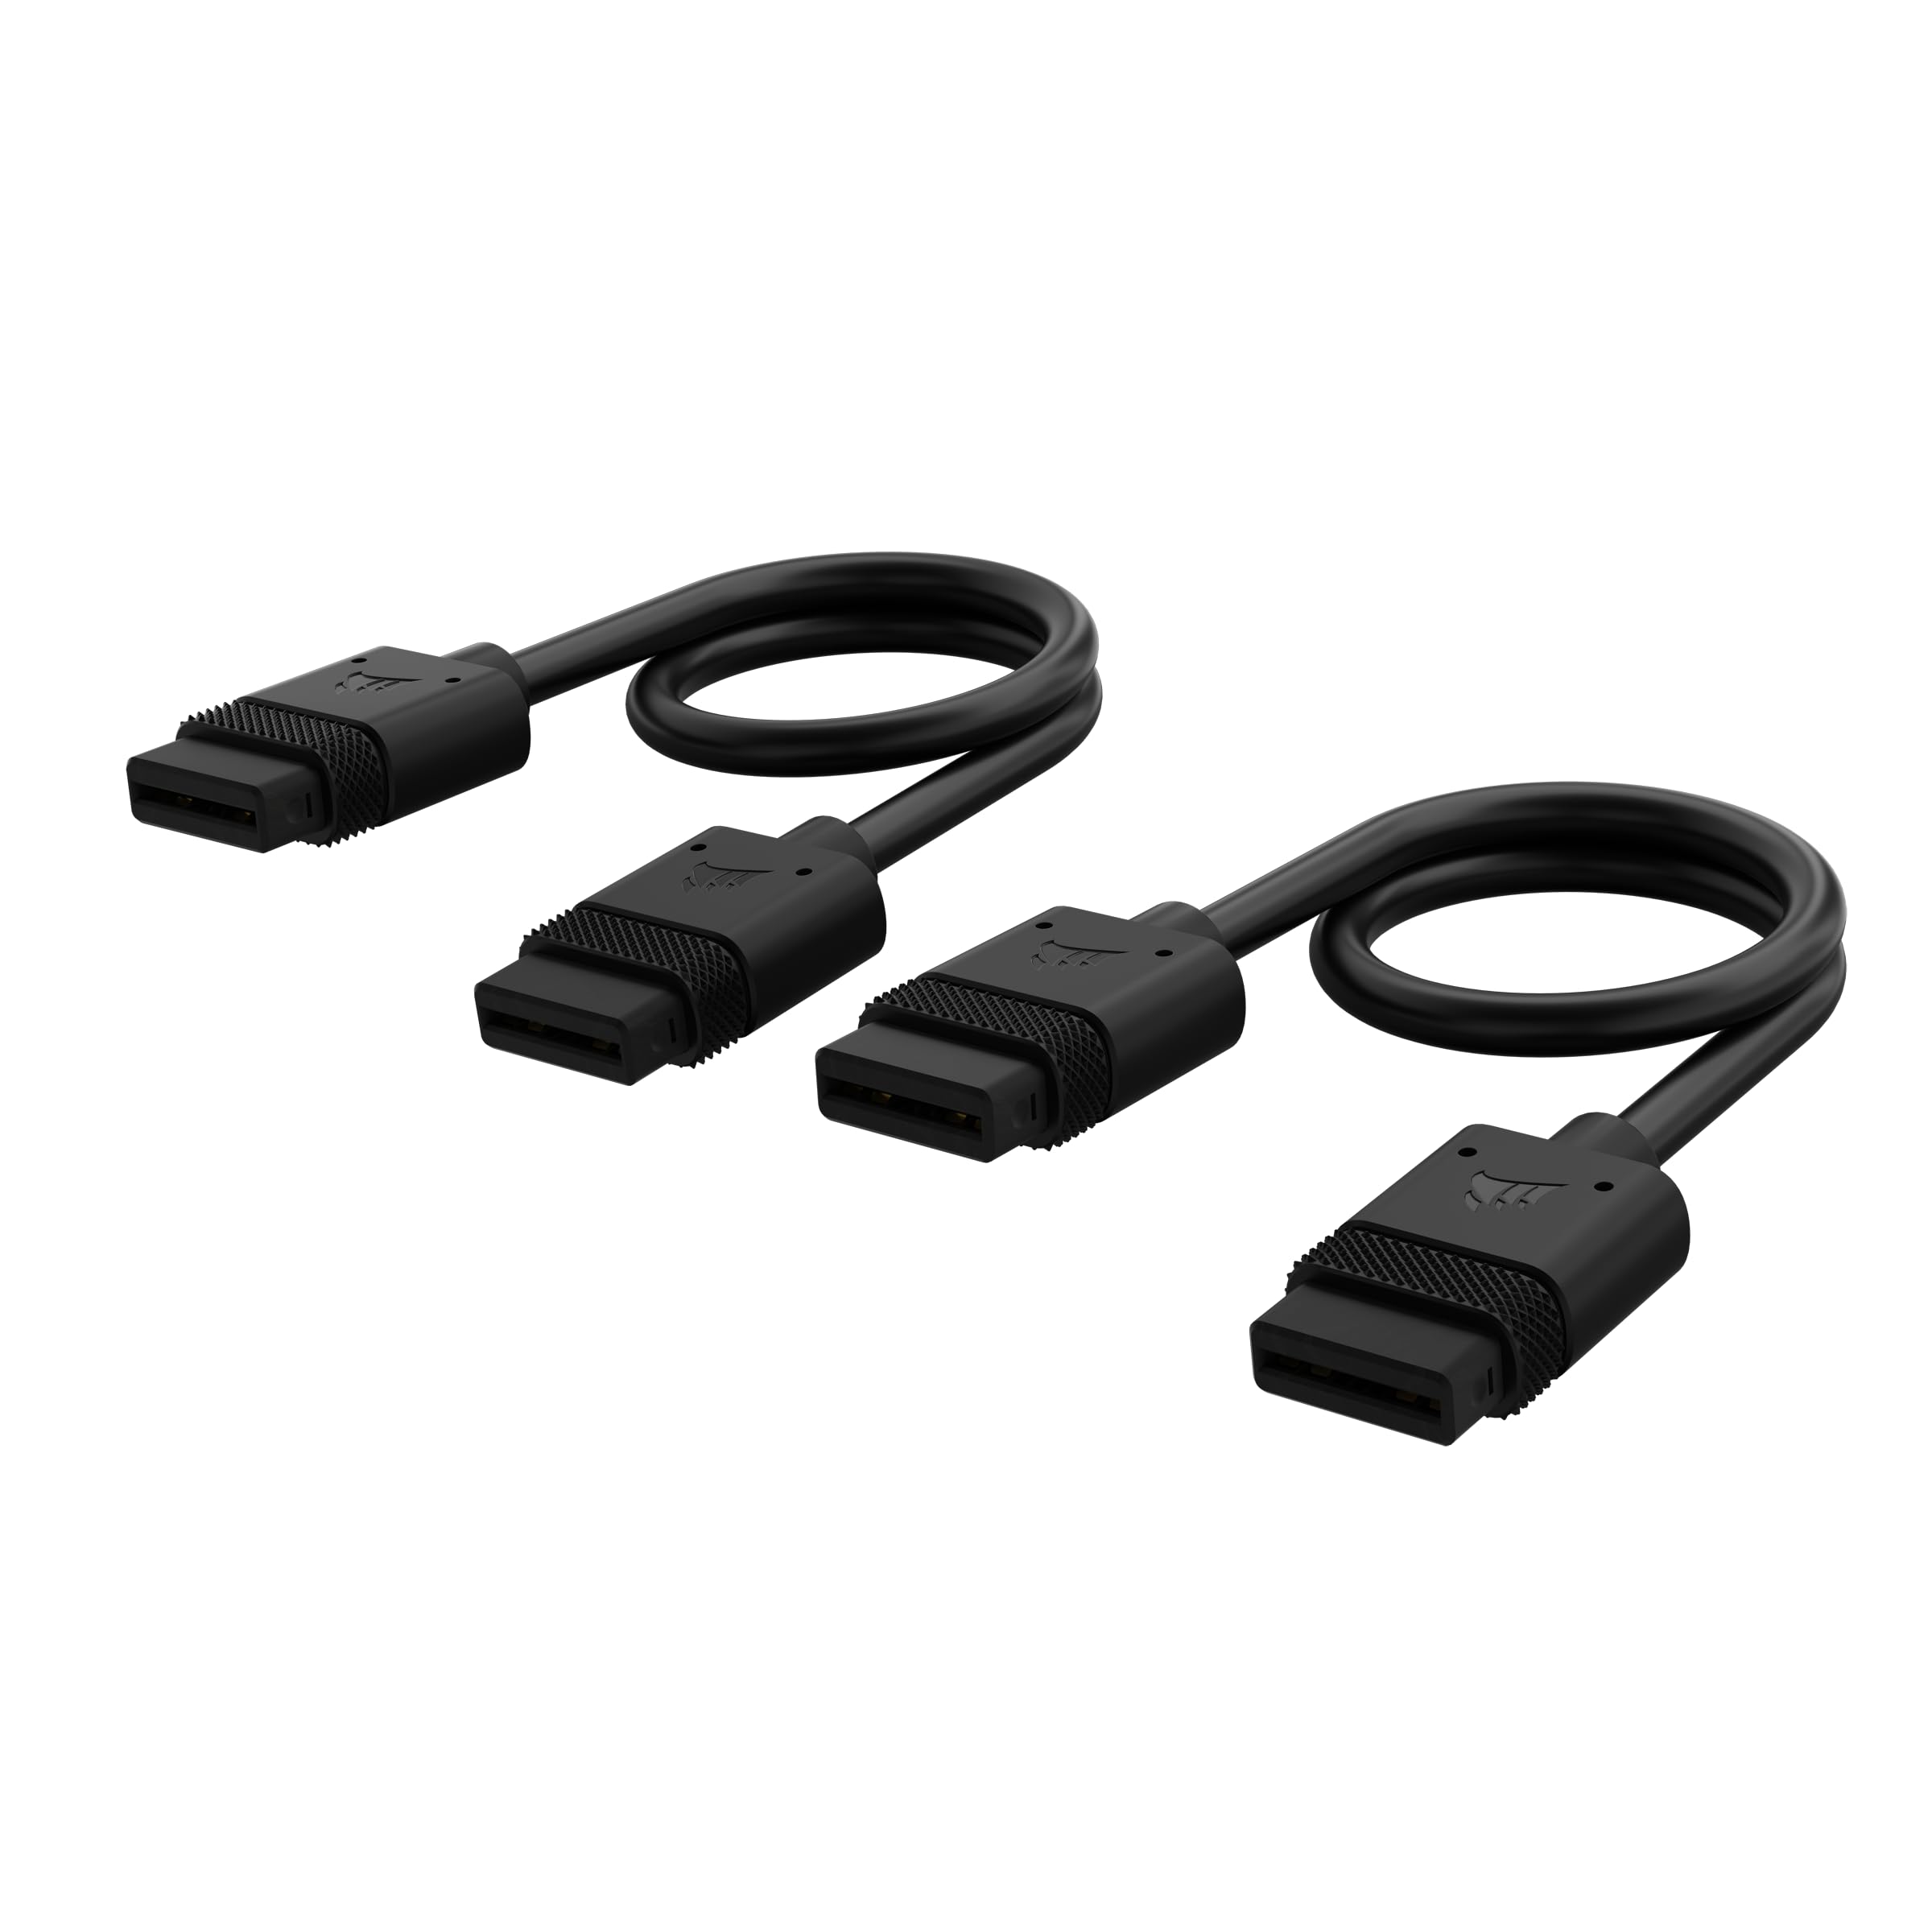 Corsair iCUE Link Cables - 2X 200mm Straight - Black